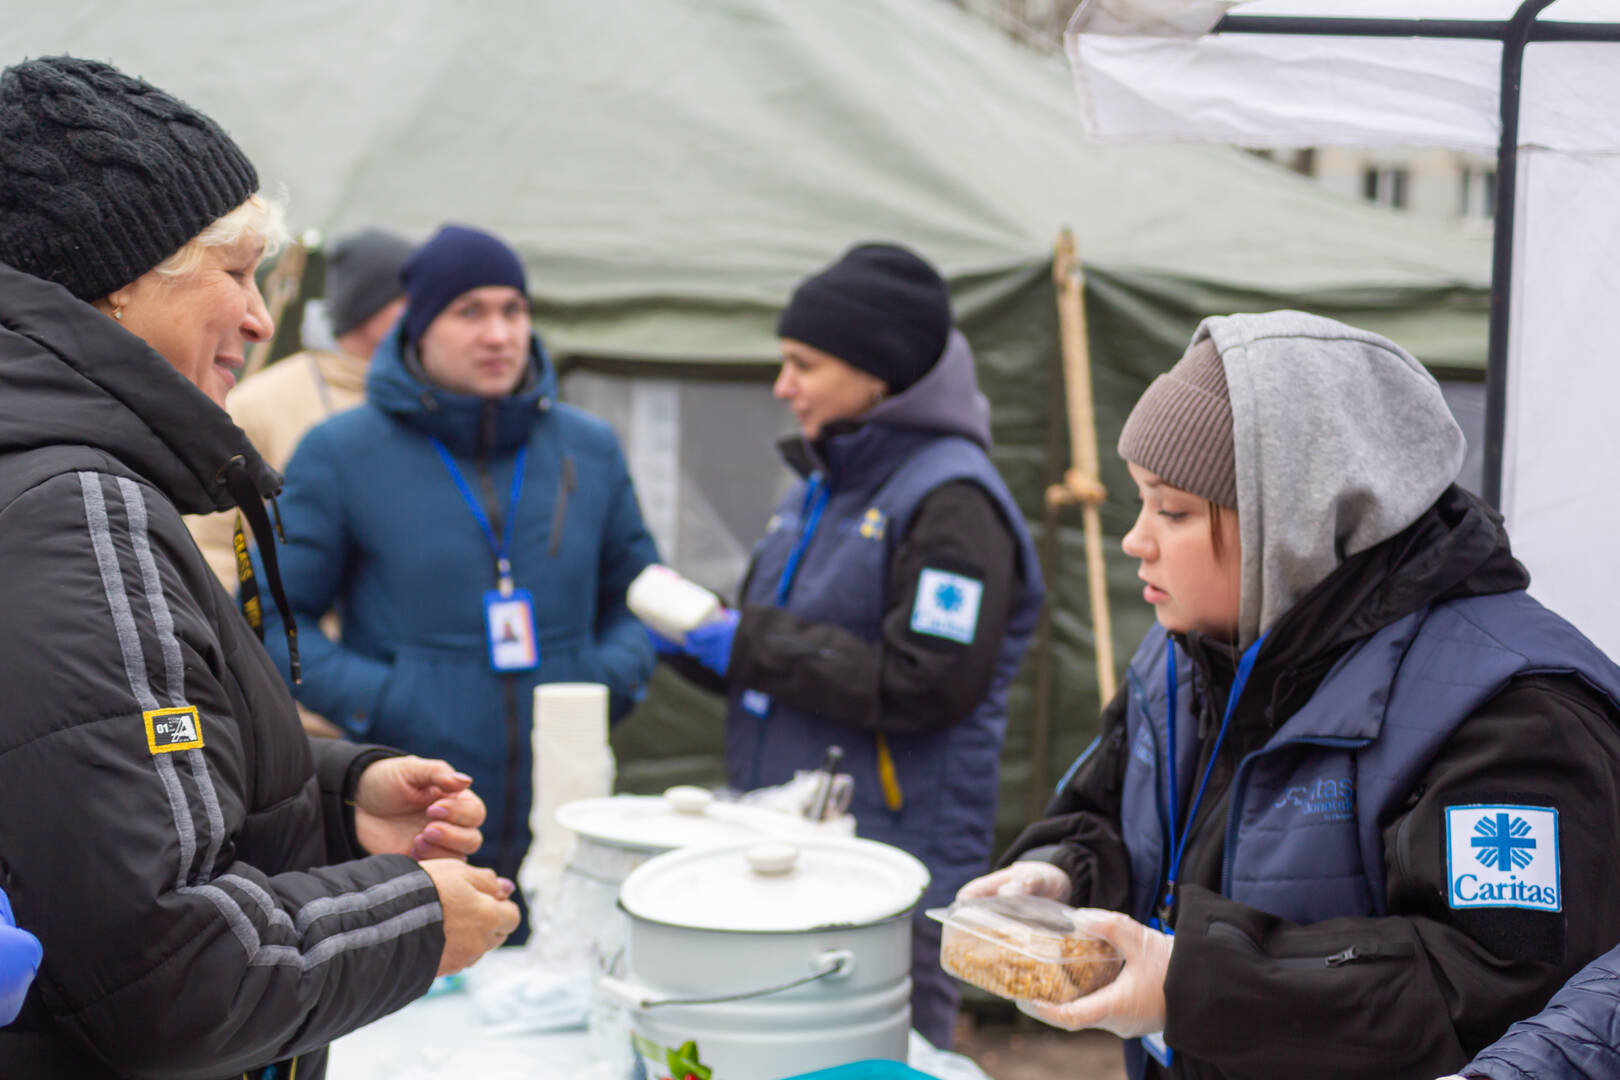 Local Caritas Donetsk in Dnipro retains its affiliation with the city Caritas was forced to evacuate in 2014. Here its staff and volunteers provide hot meals for rescuers and victims of the Jan. 14 Russian strike on Dnipro. Caritas also provides psychological counseling for people traumatized by the war's violence. Photo courtesy of Caritas Ukraine.